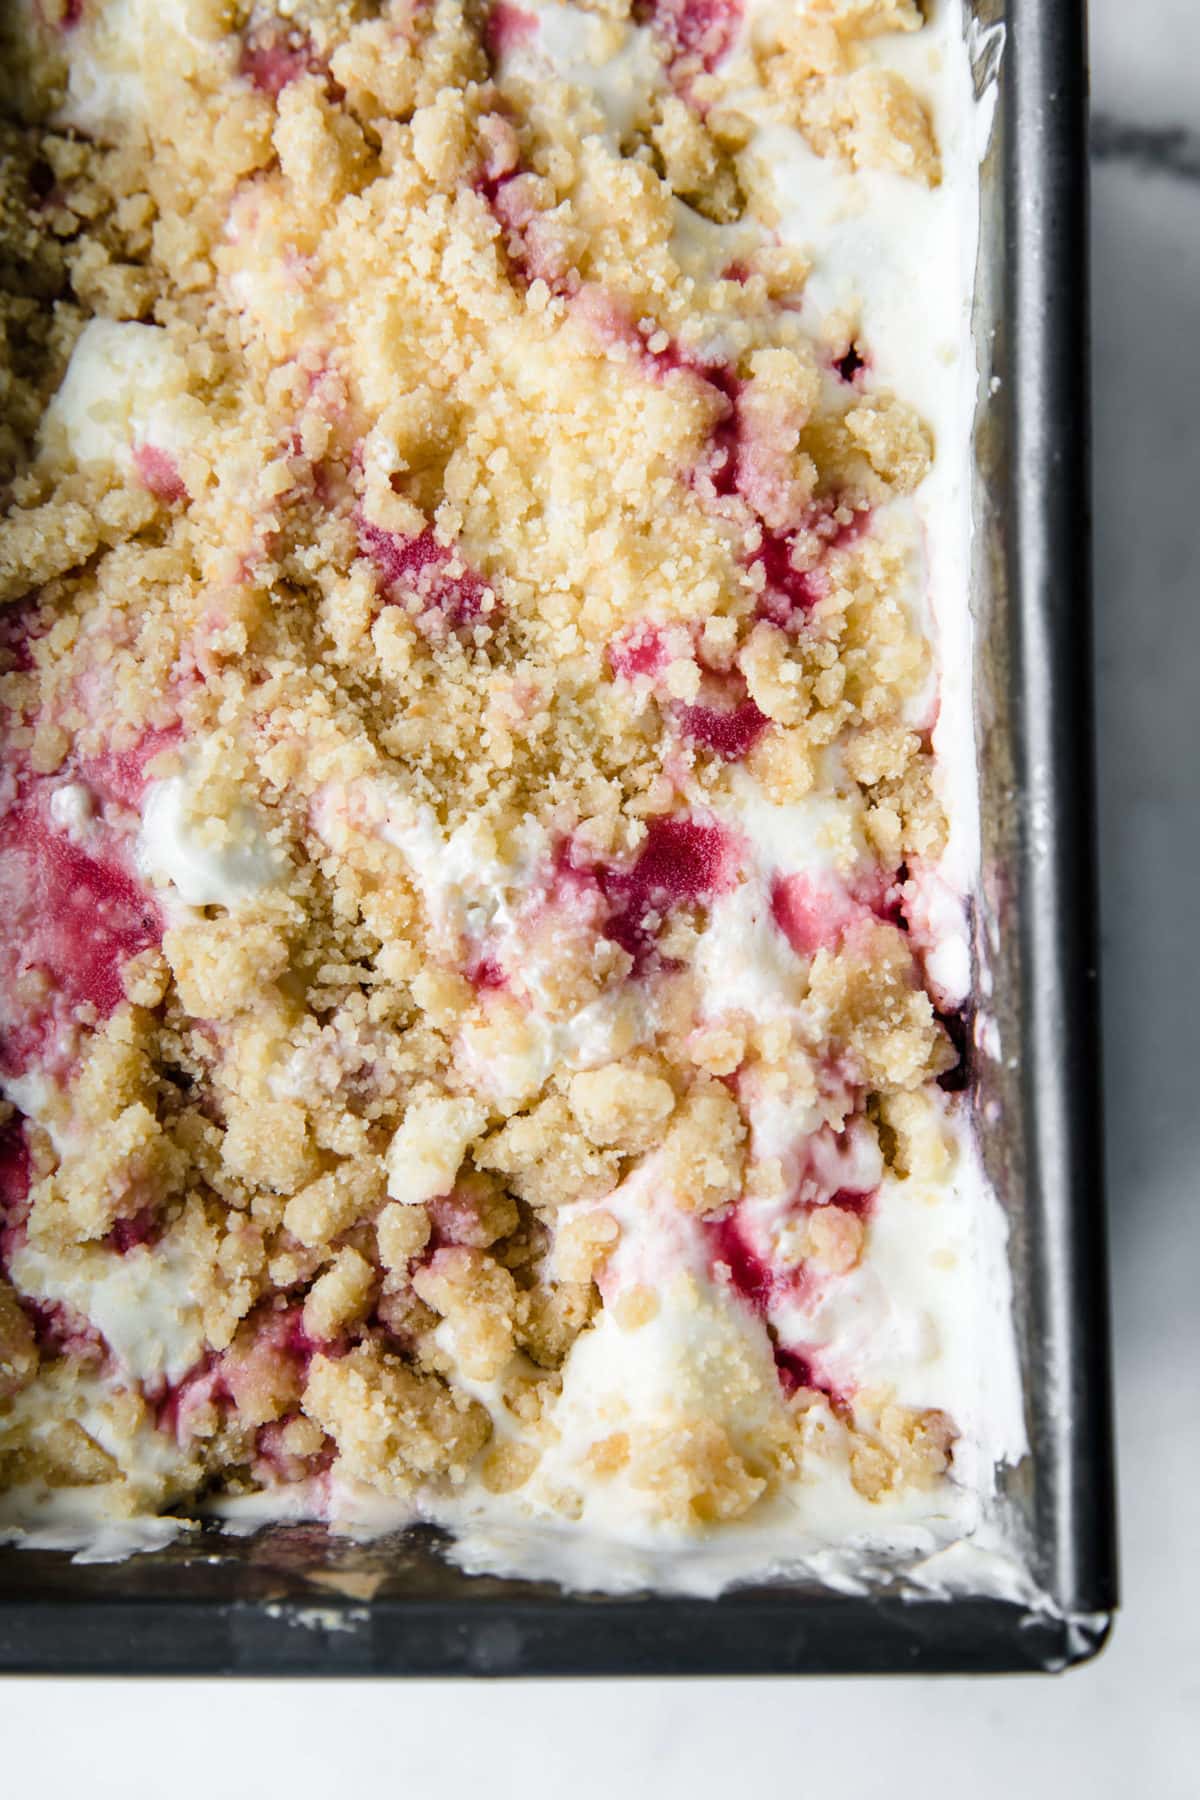 a vintage loaf pan full of homemade ice cream with strawberry sauce and a gluten free crumble on top.